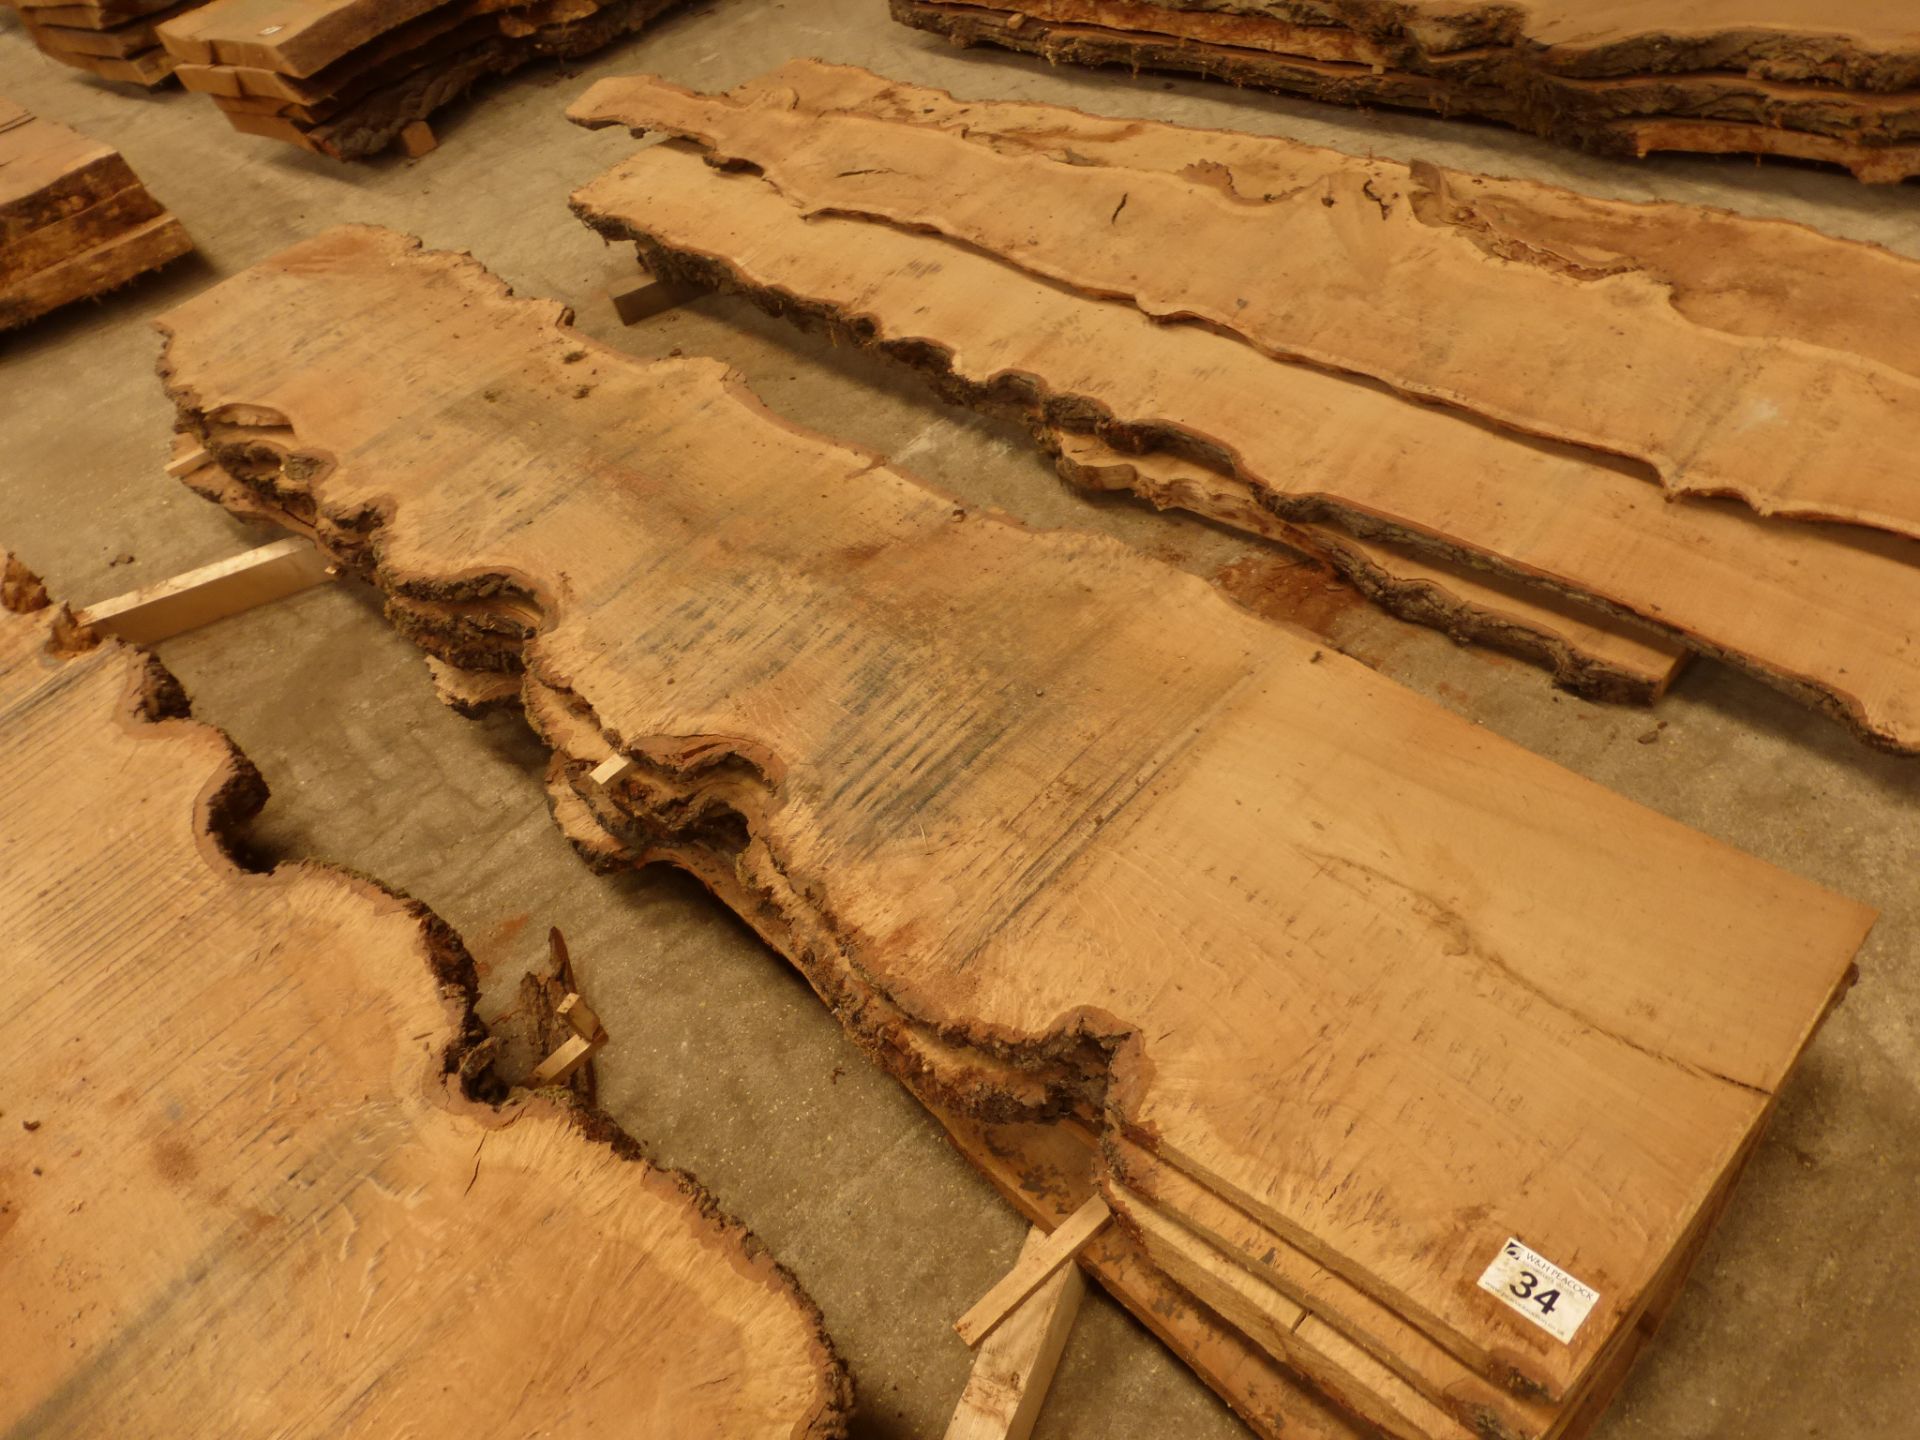 5 burr oak waney edge boards 2500 x 400 x thickness 60mm to 30mm - Image 2 of 5